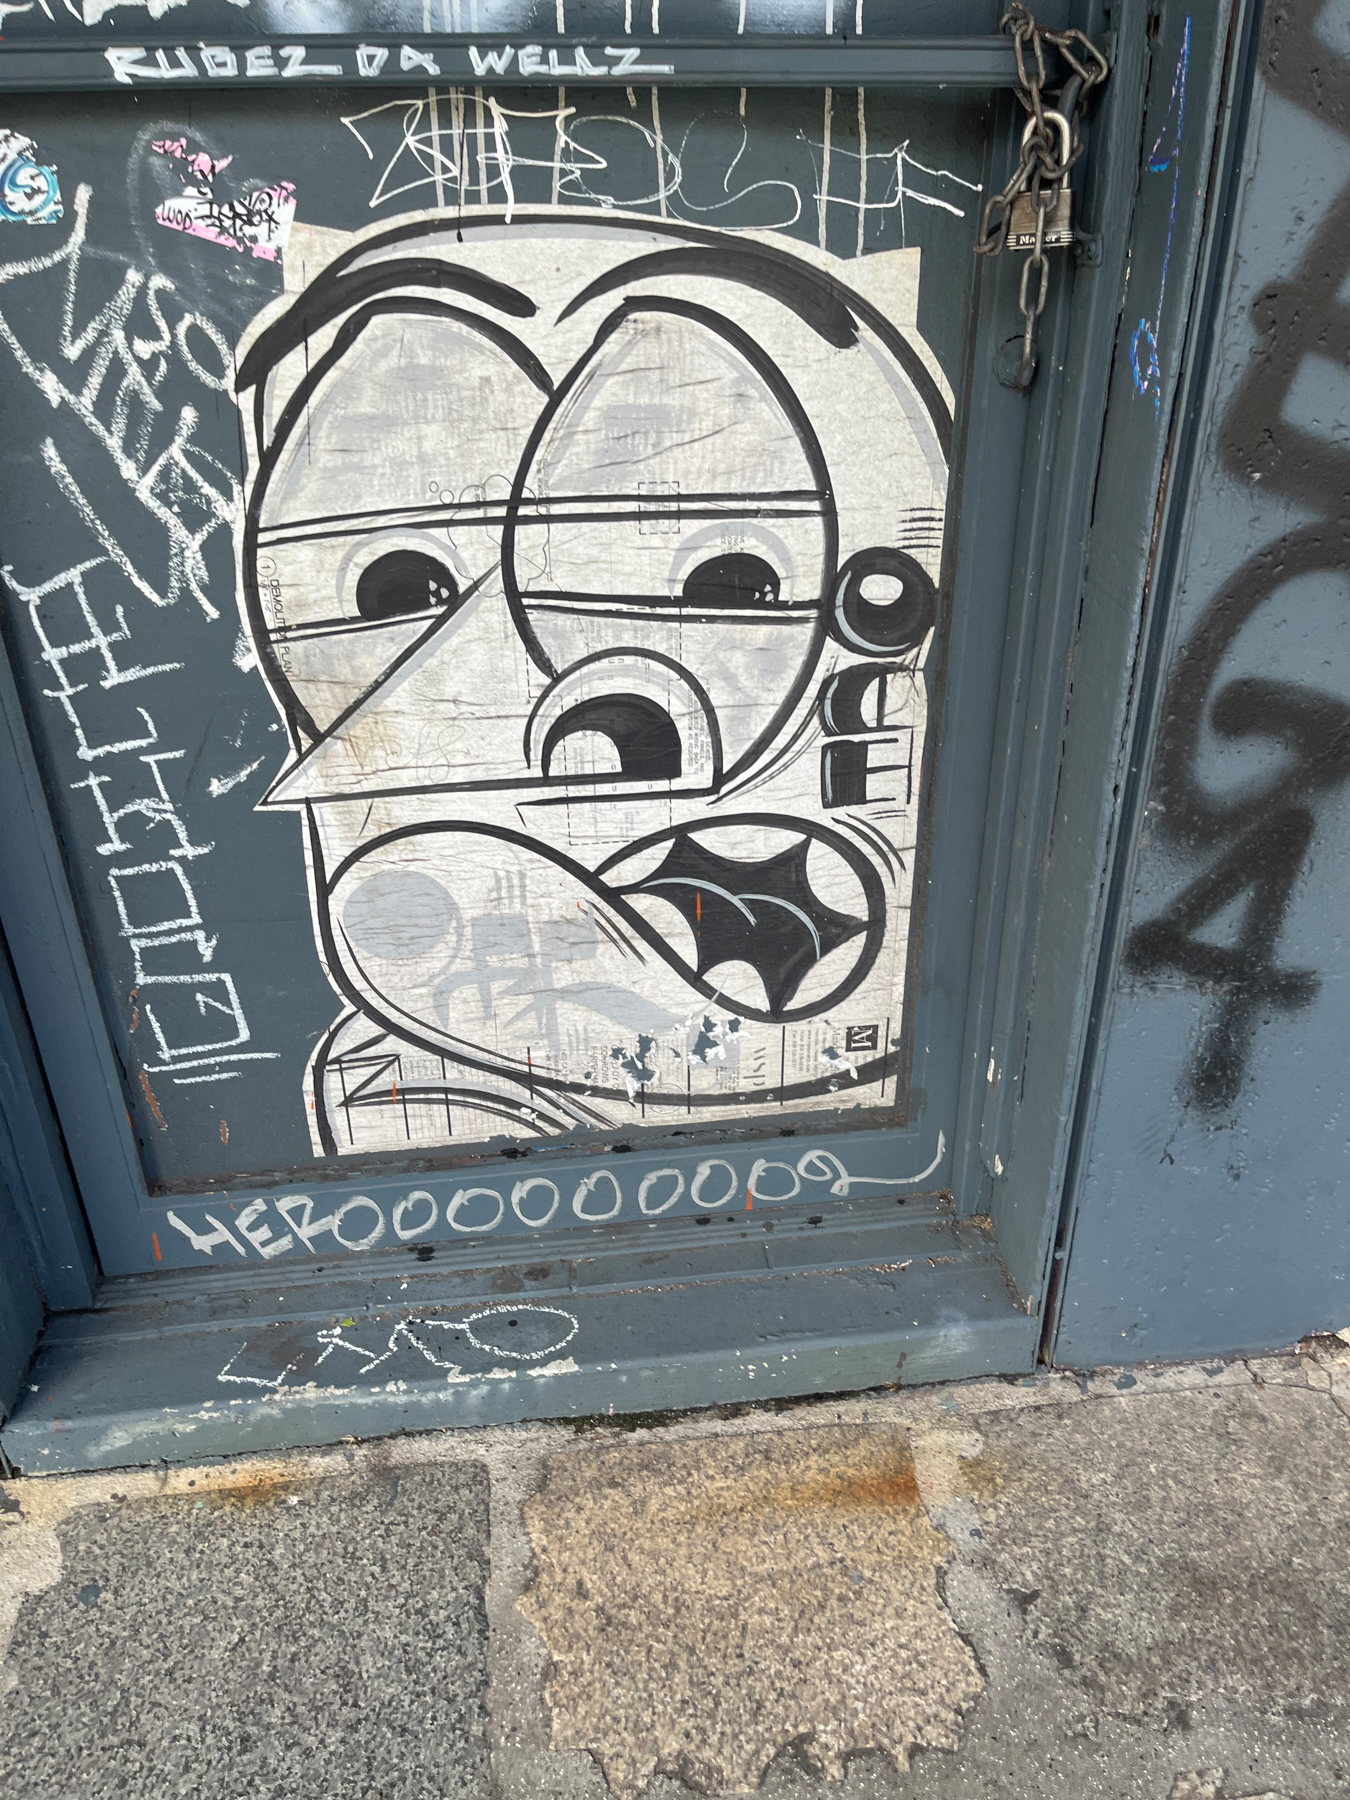 Graffiti on a doorway of a face, big eyes, triangular nose, with a concerned and worried expression. Various scribbles around and a padlock and chain hikding the door locked.